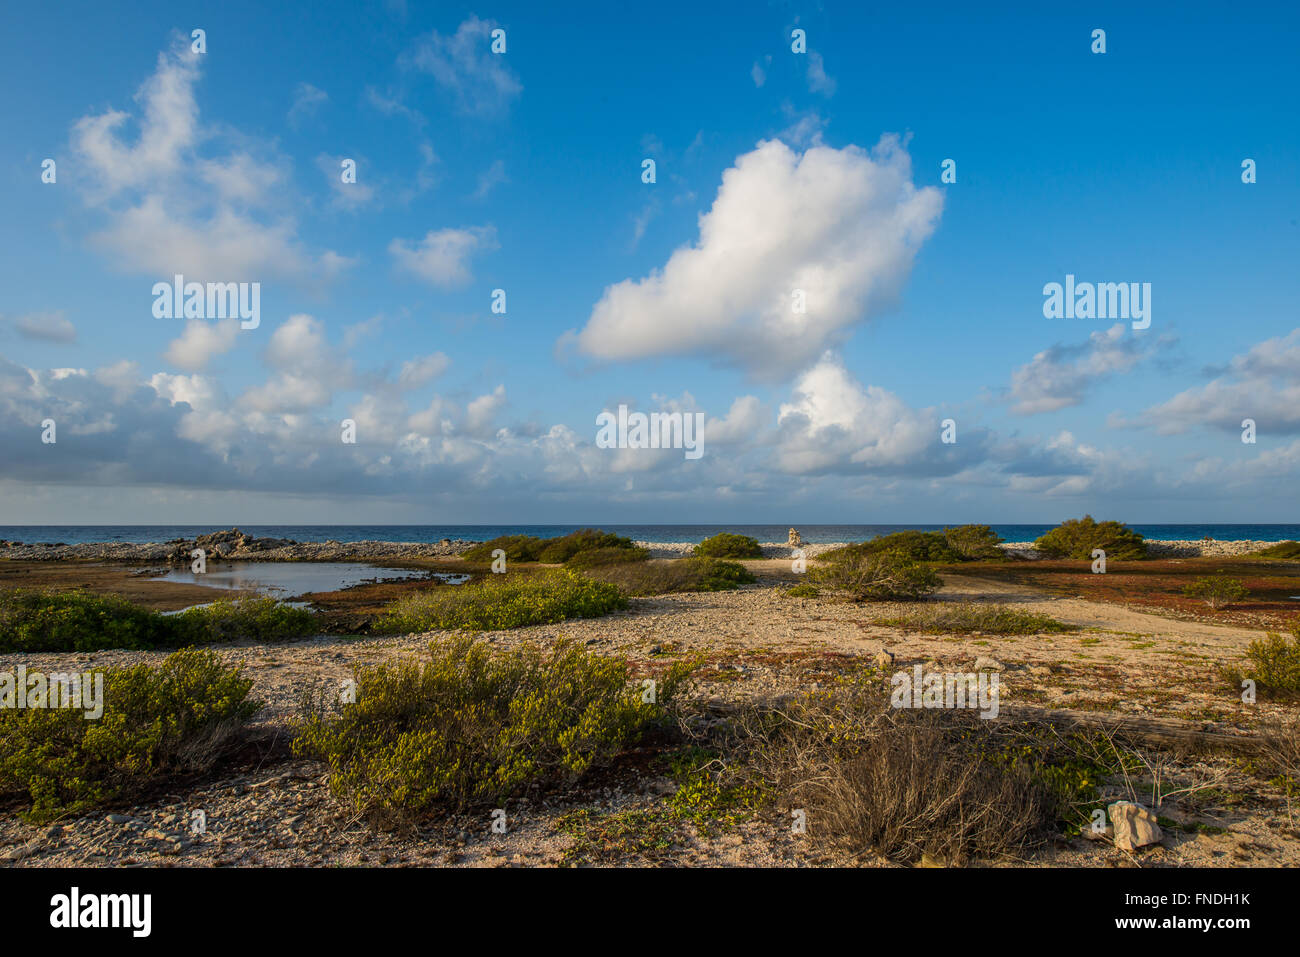 Beautiful view over the beaches and Caribbean sea of Bonaire with The sun sining behind the clouds. Stock Photo